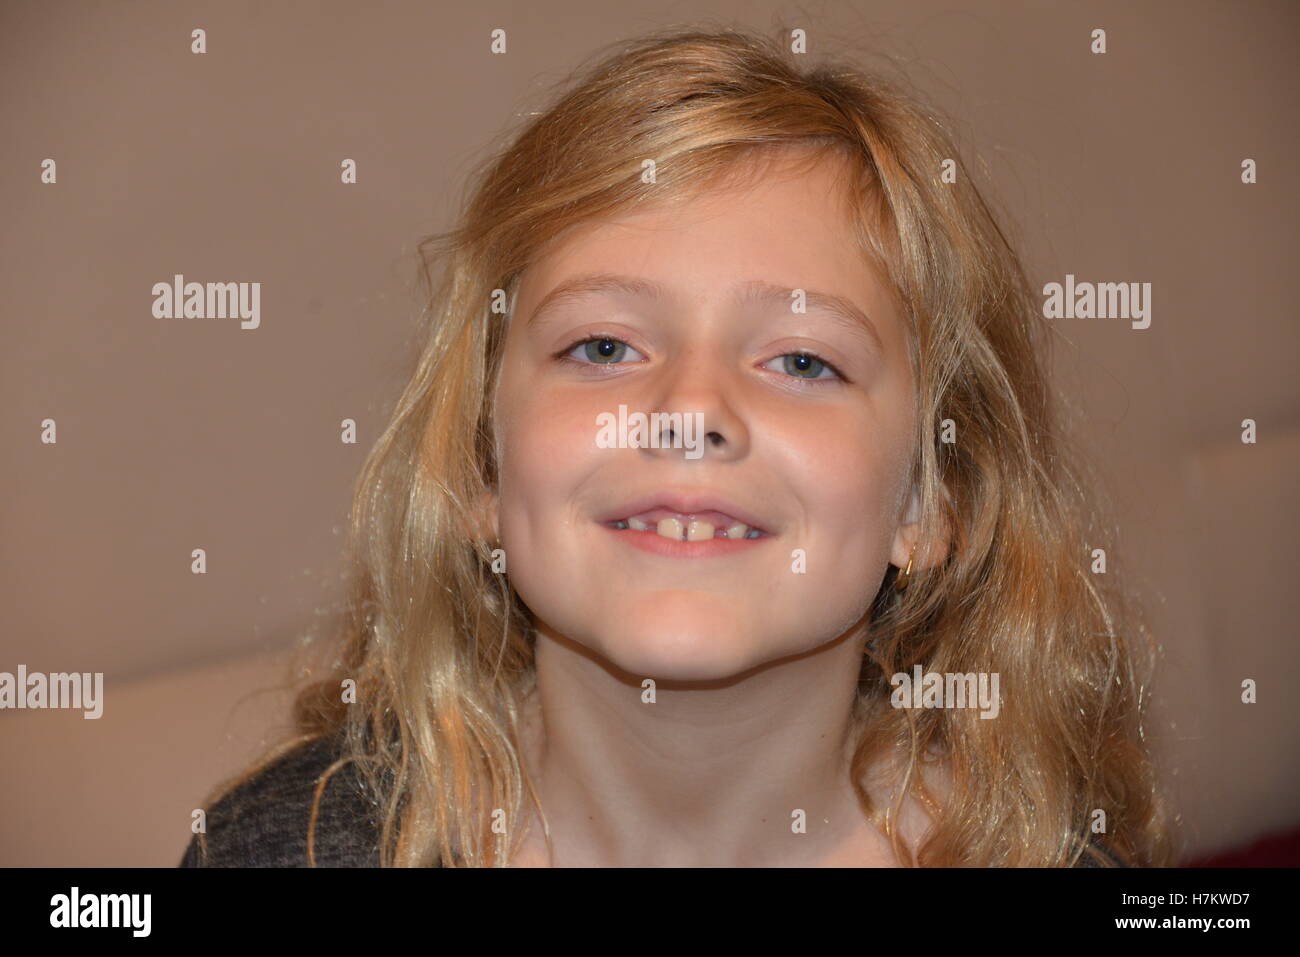 head shots of young girl aged 8 years smiling Stock Photo